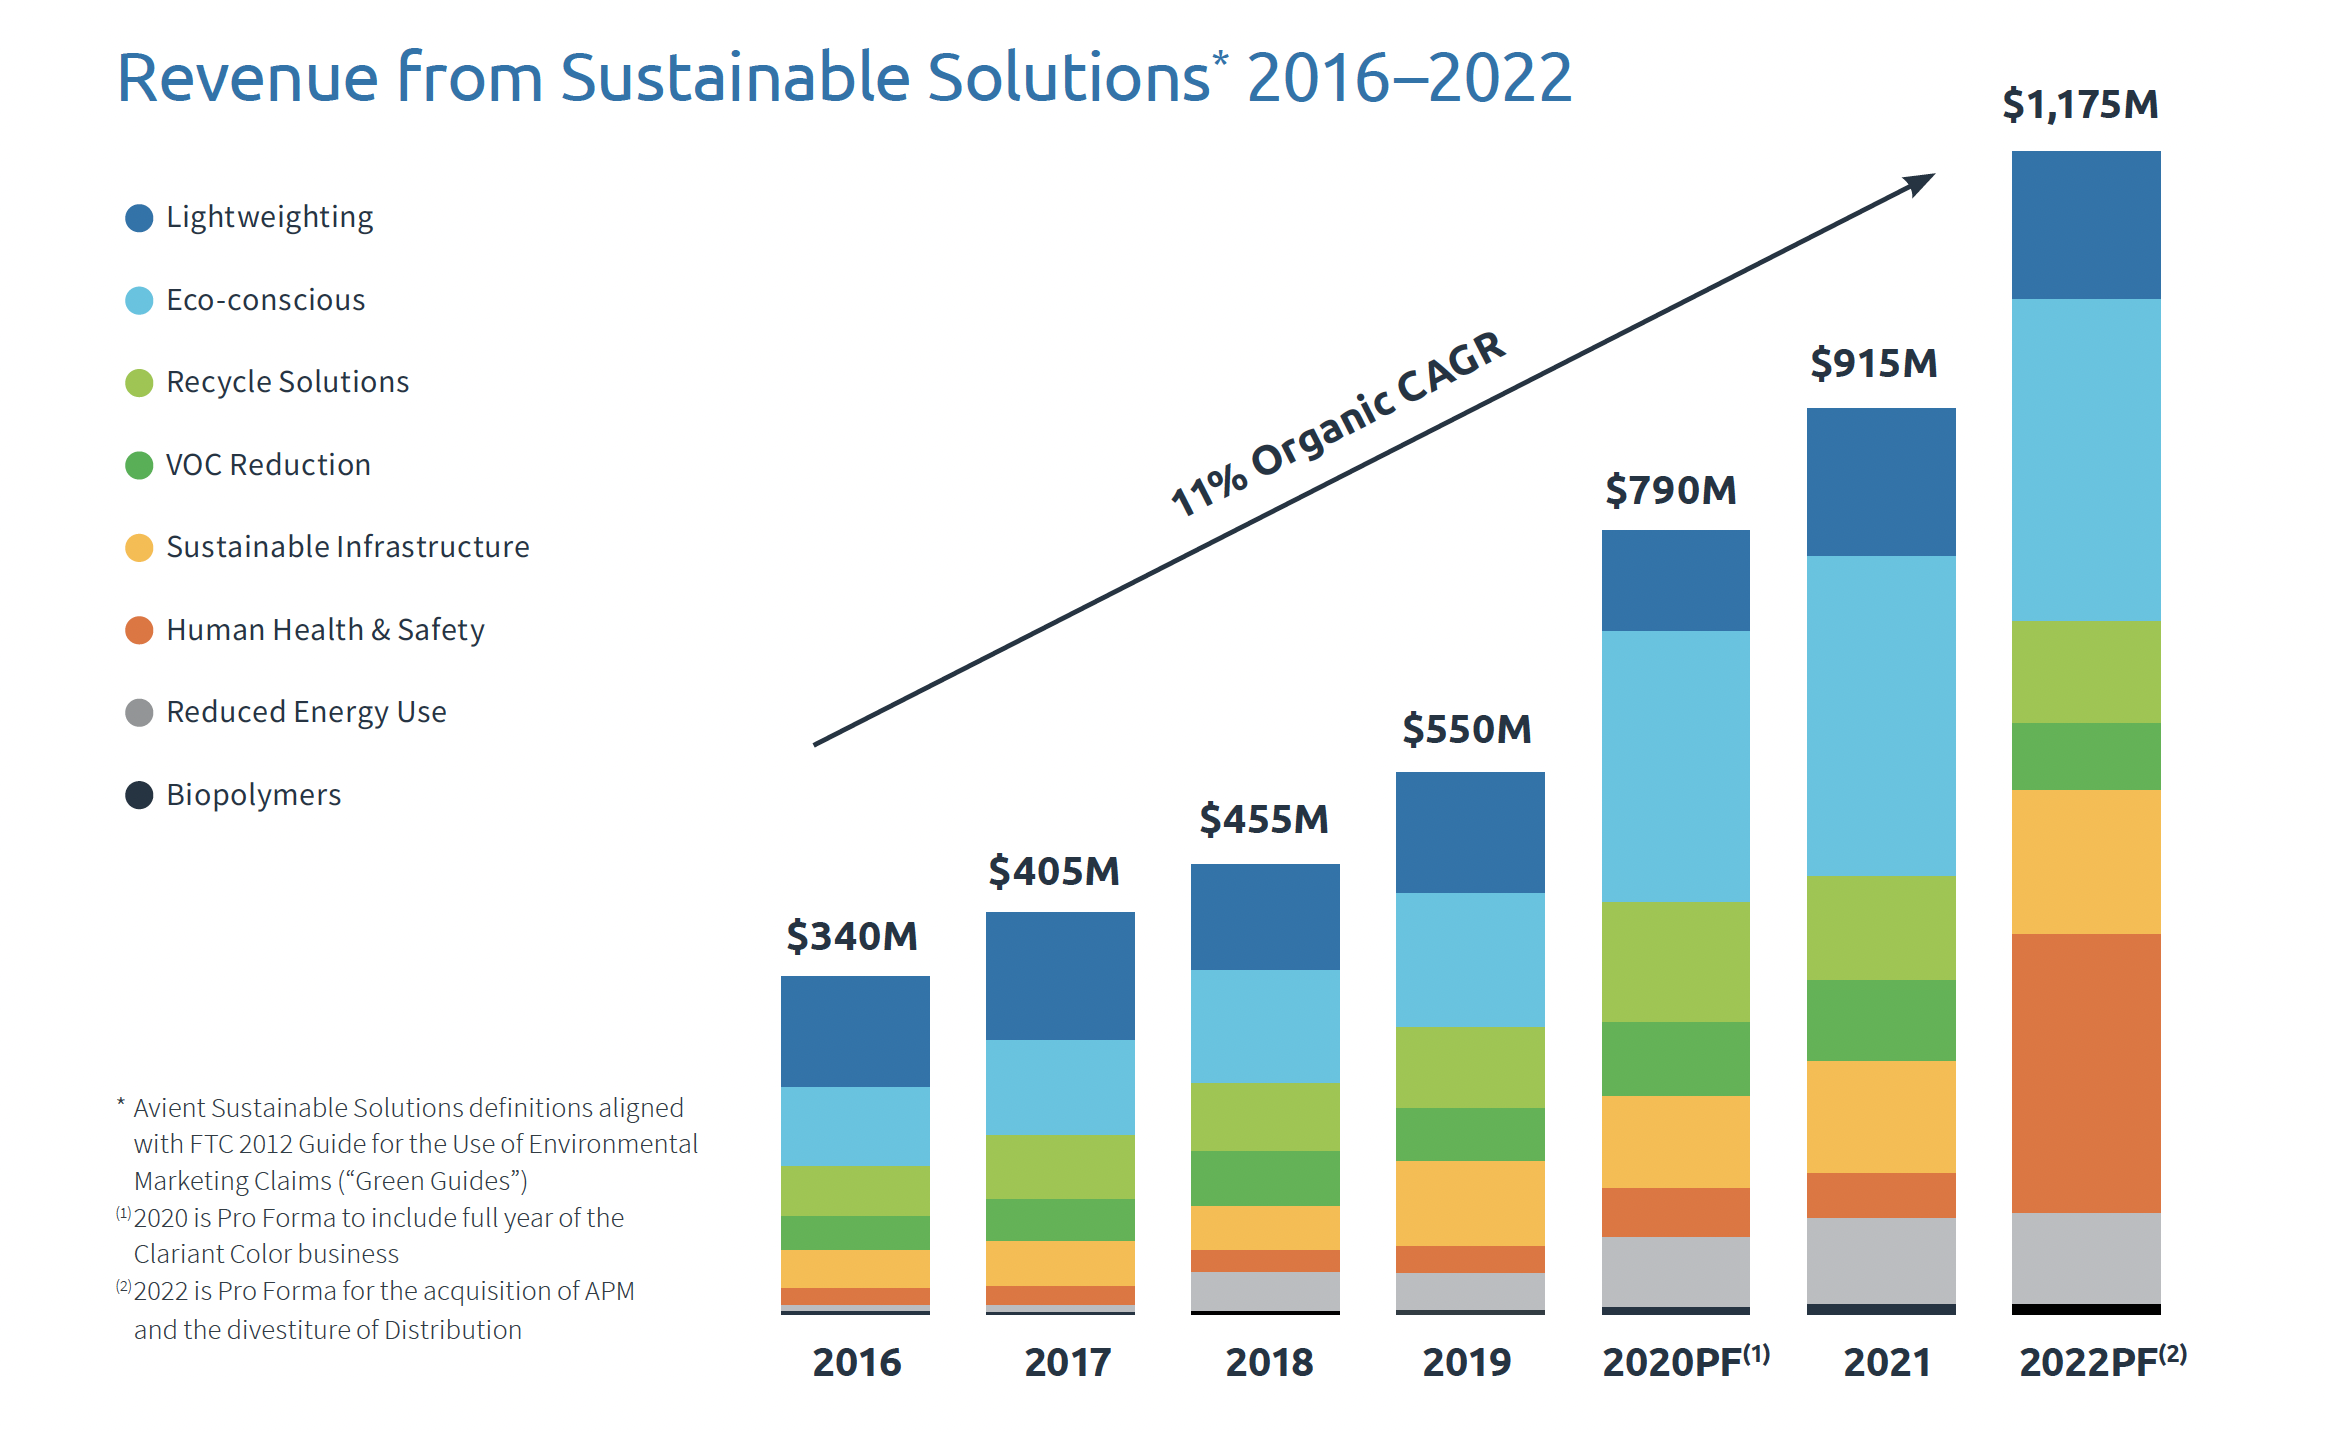 Revenue from Sustainable Solutions